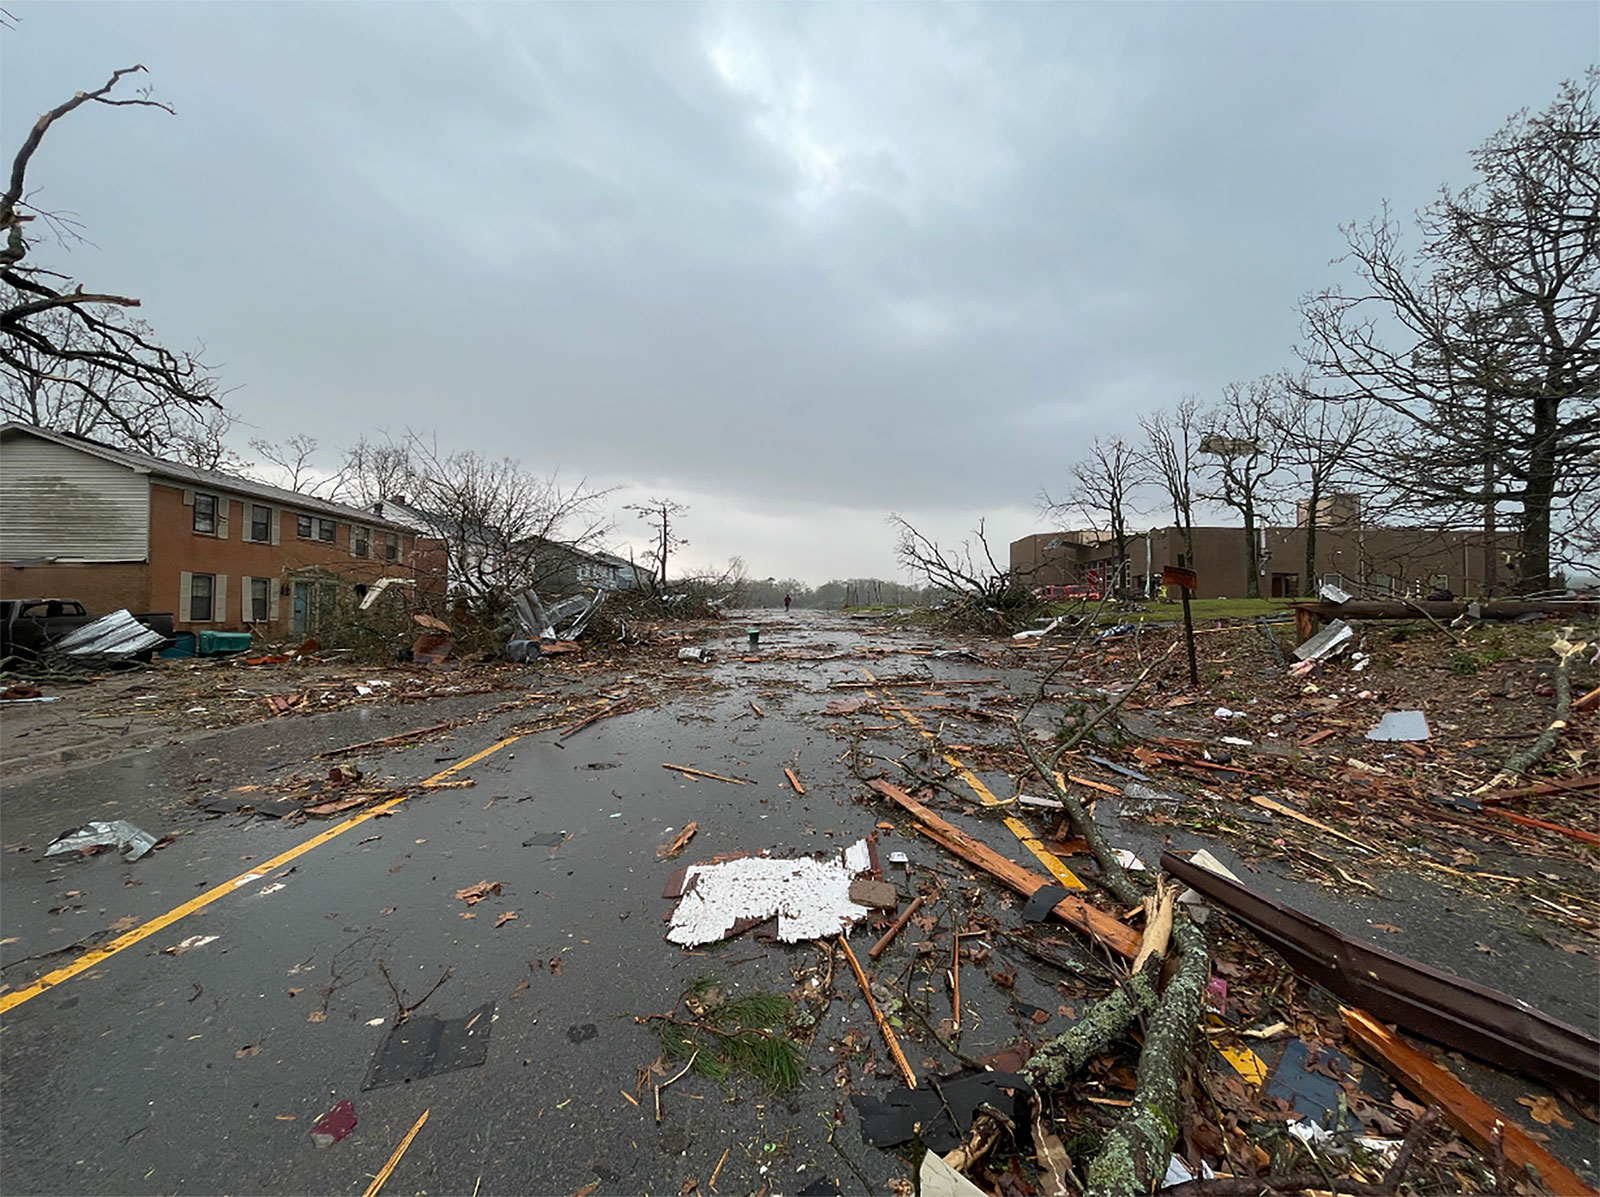 High probability of multiple injuries after a tornado struck the Little